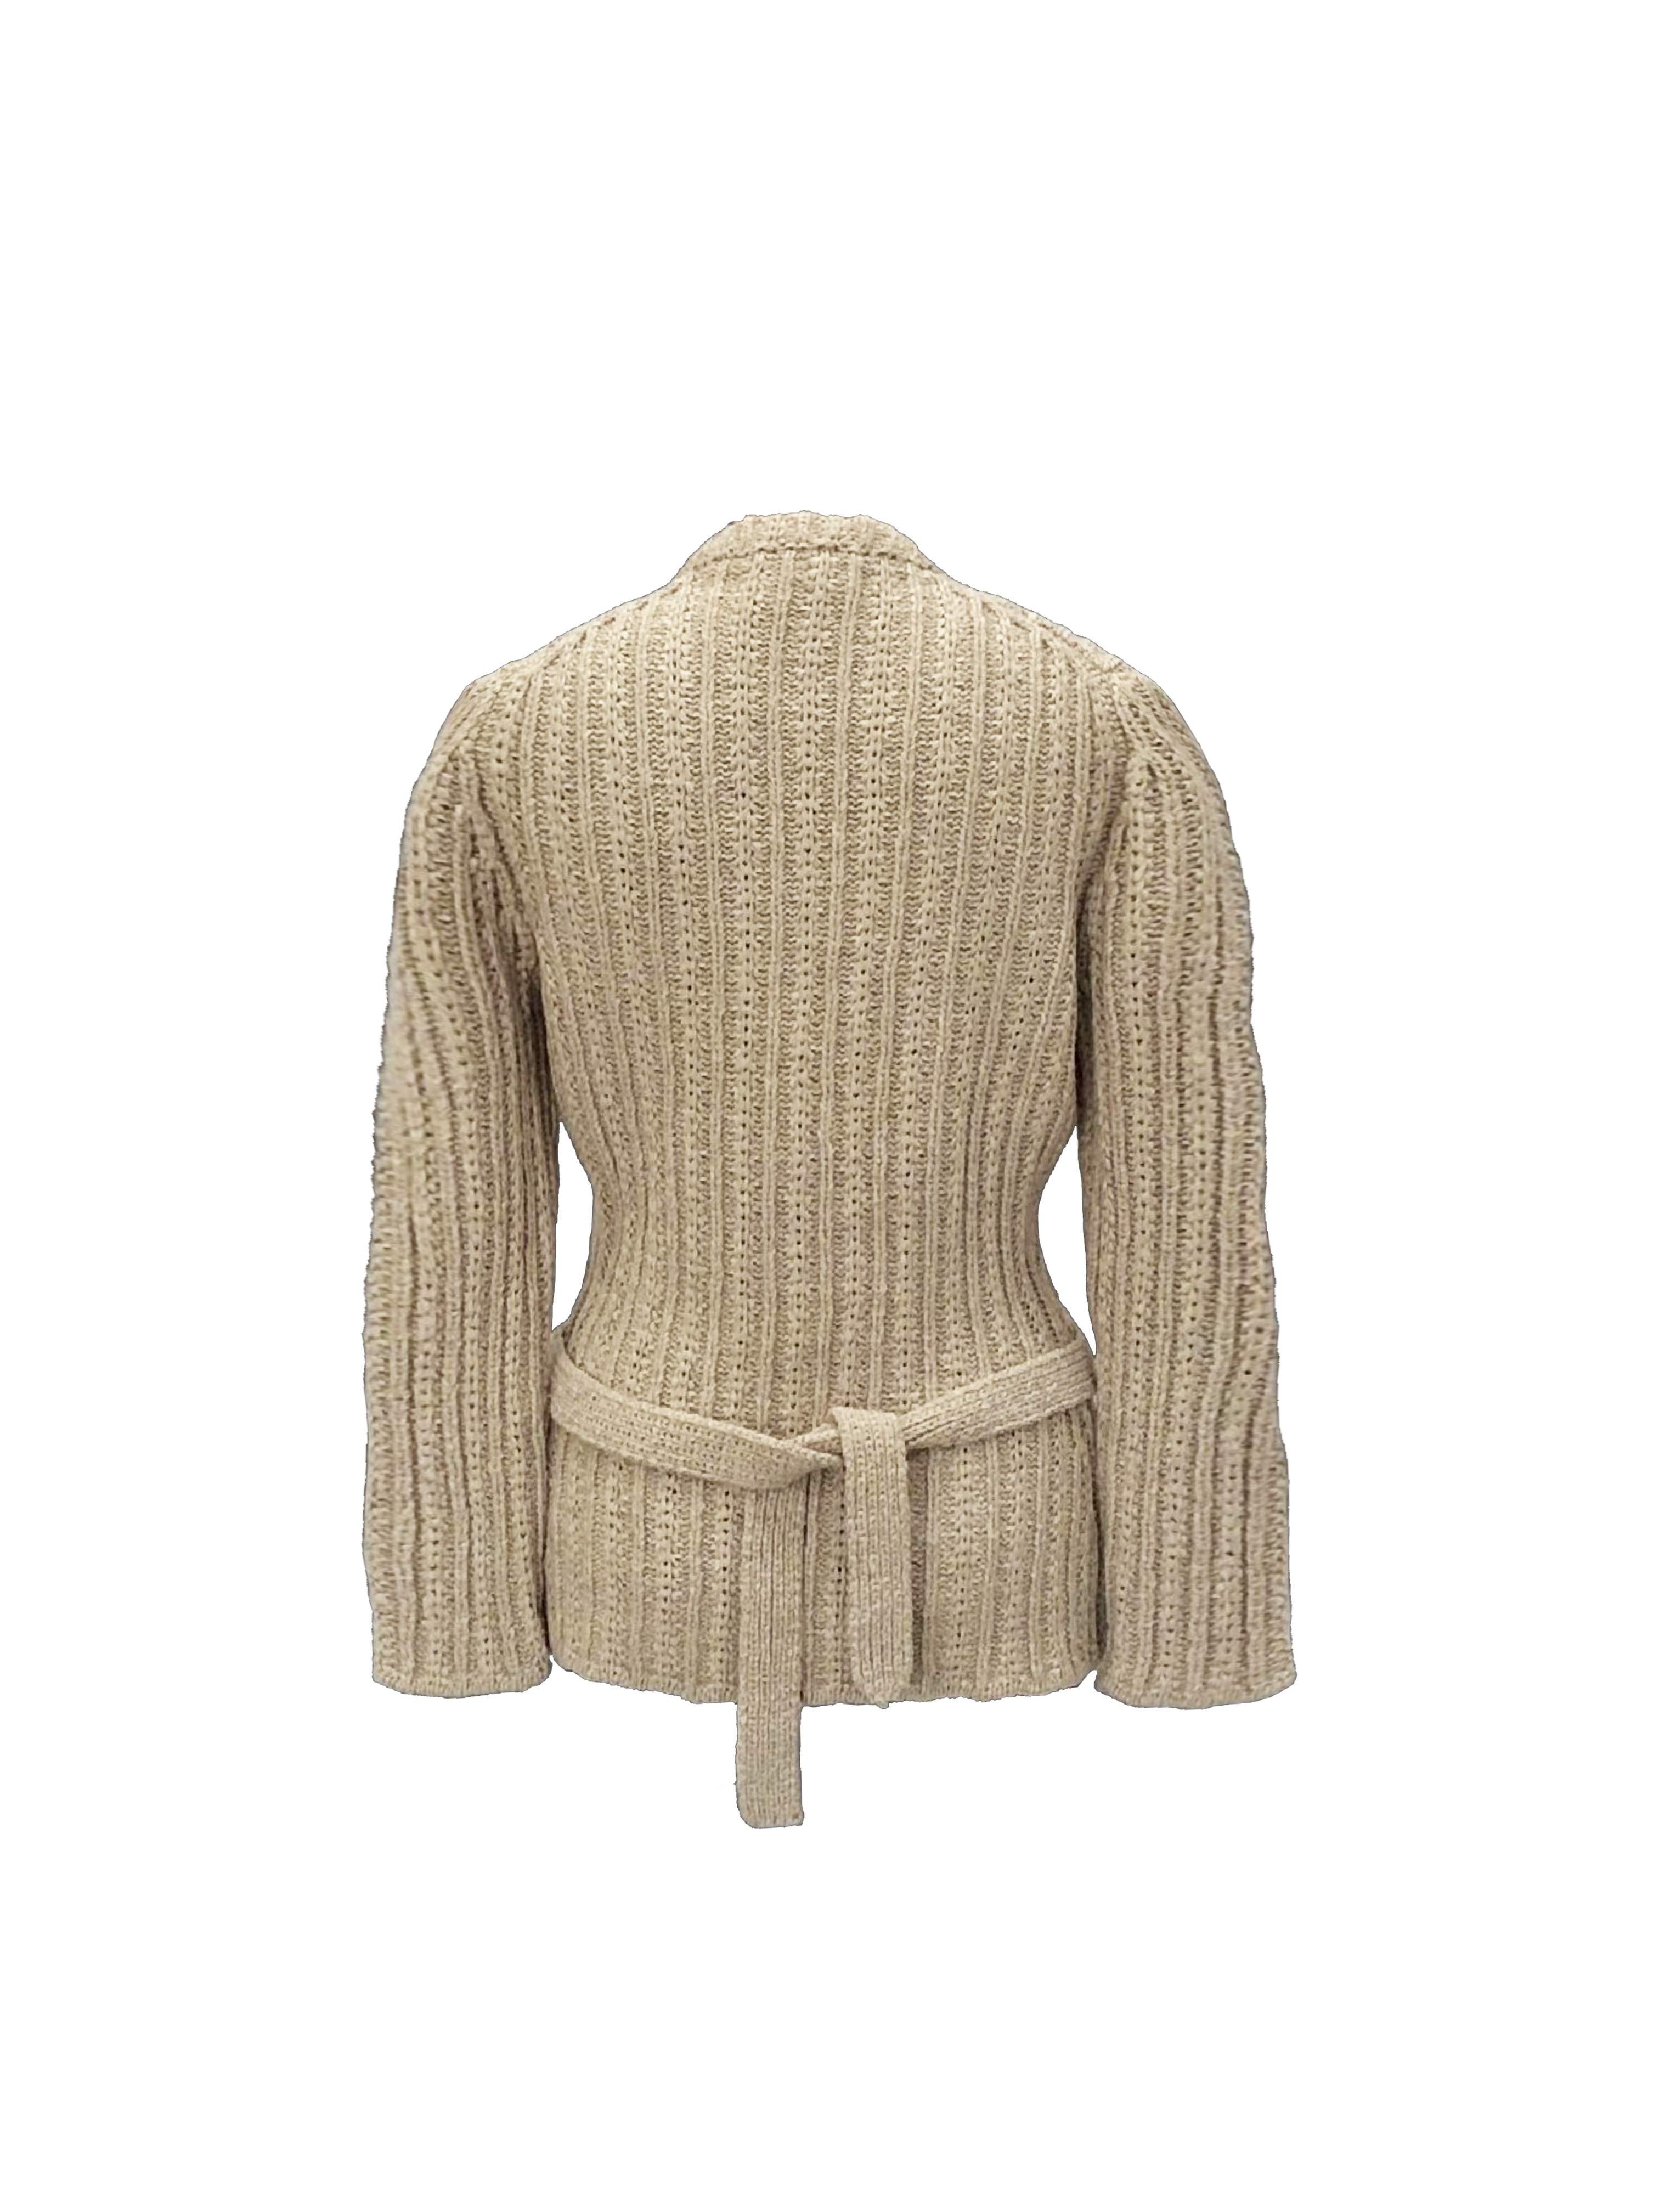 Chanel 2000s Belted Knit Sweater